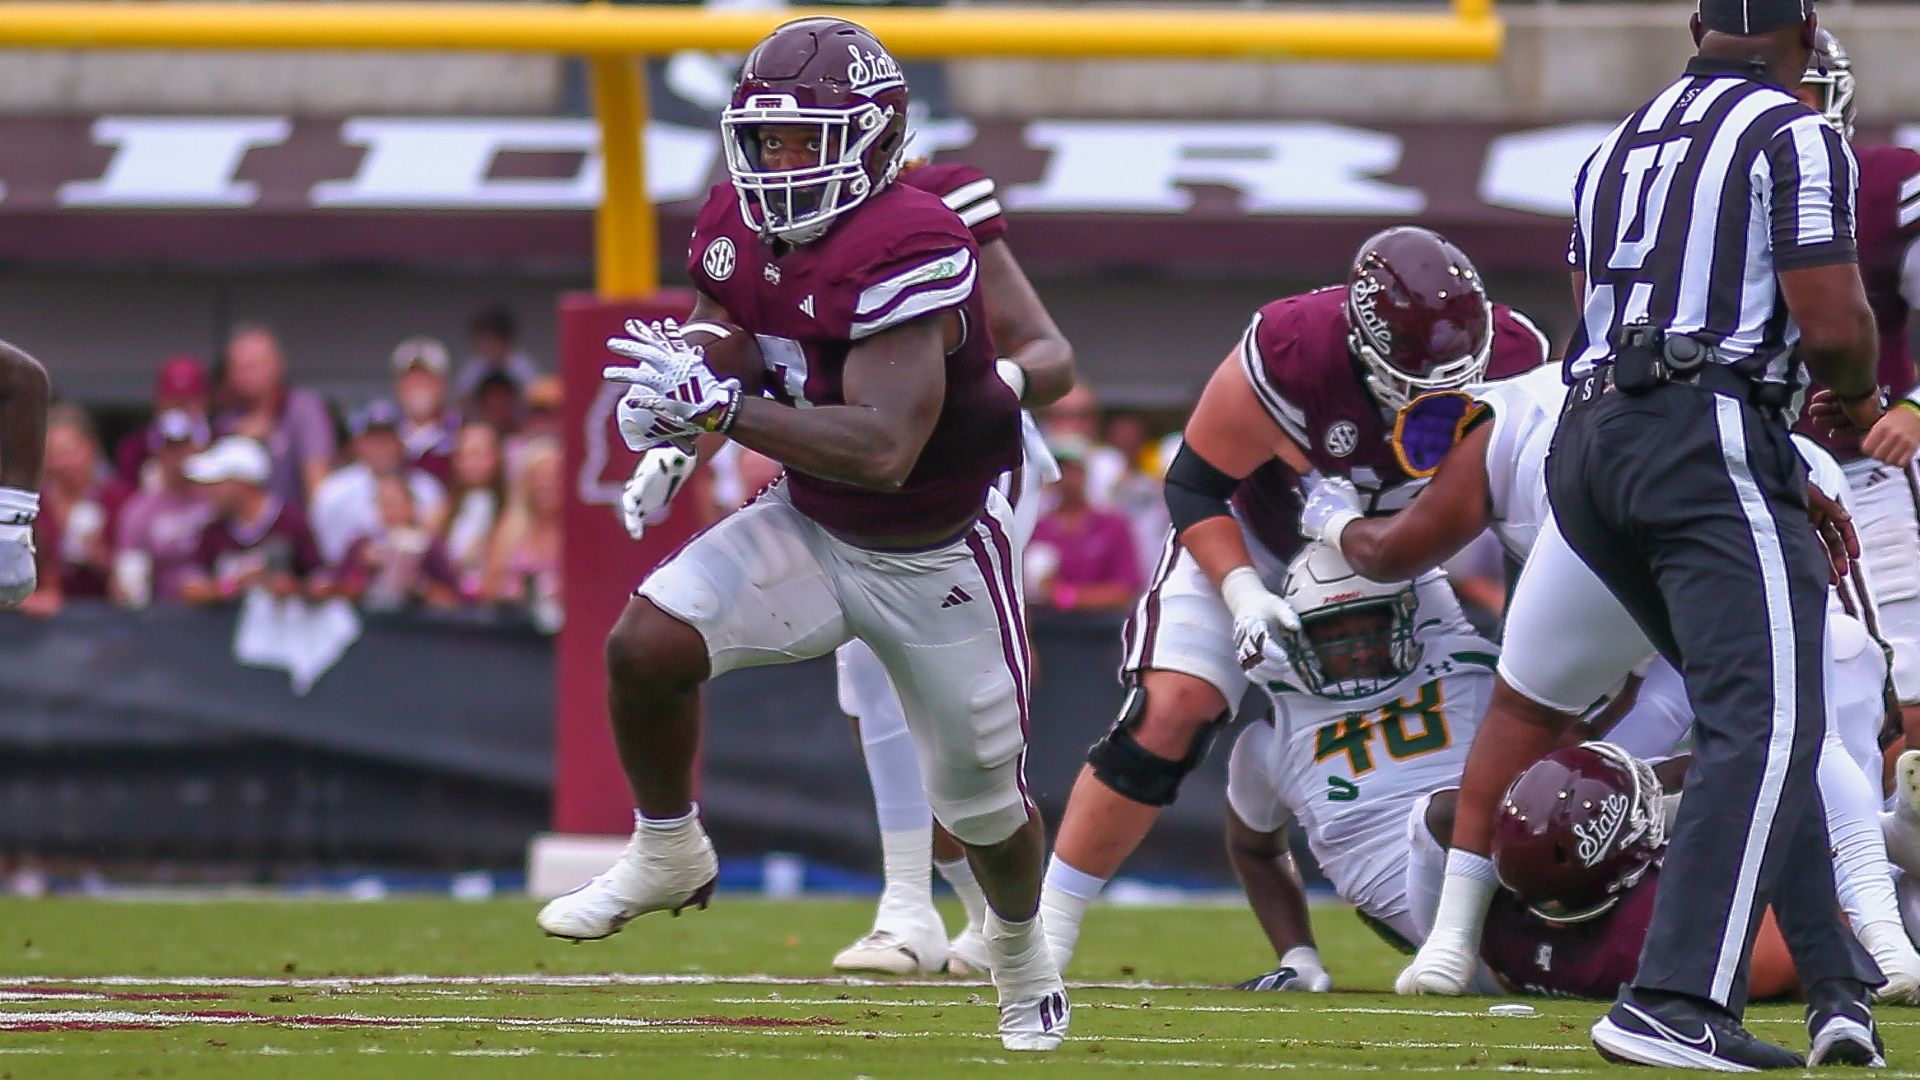 MS State's new run-heavy approach will cause problems